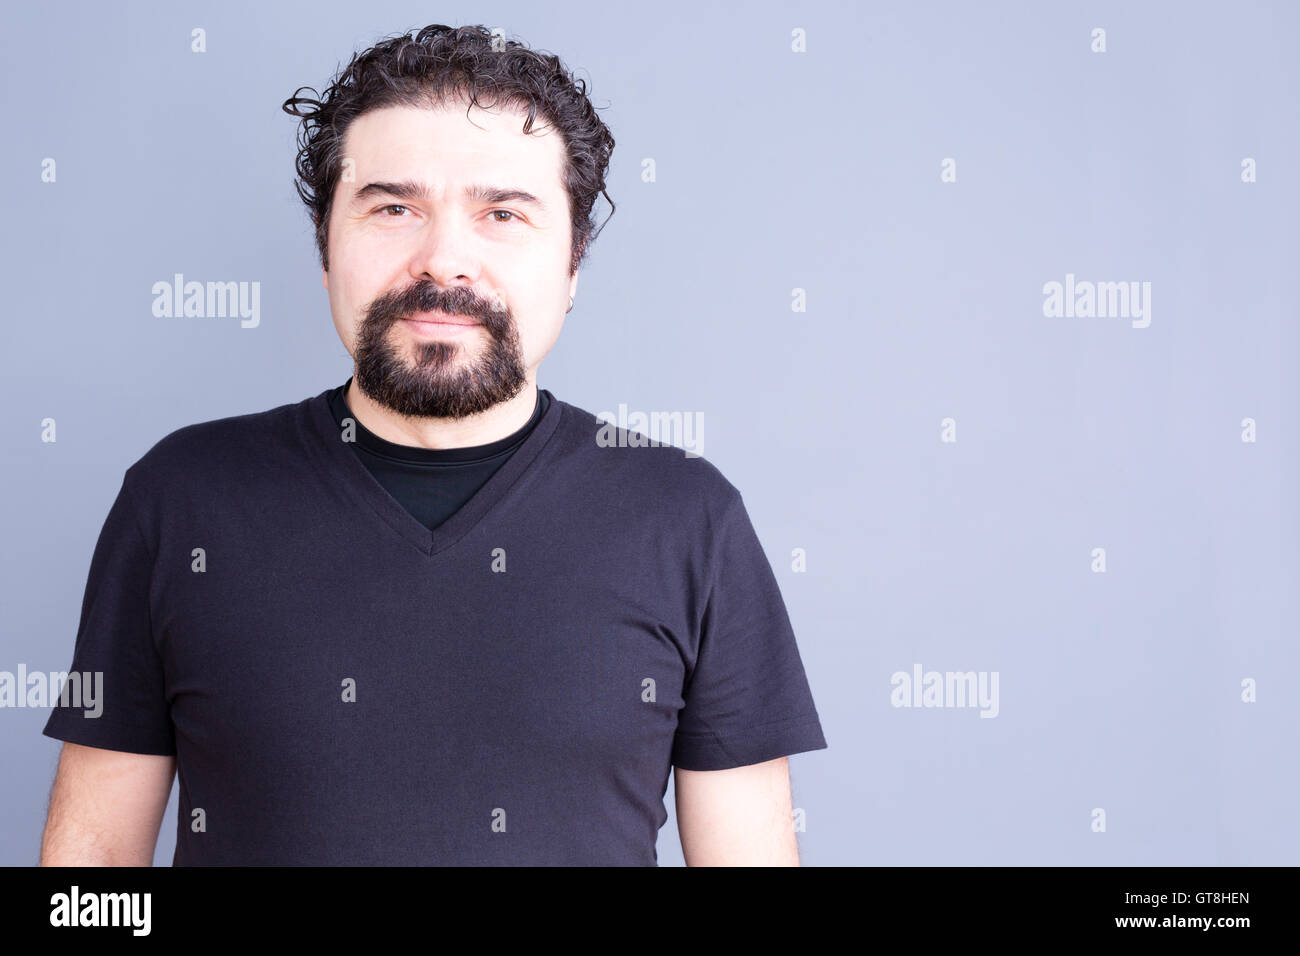 Waist Up Portrait of Mature Man with Beard and Dark Curly Hair Wearing Black T-Shirt and Staring at Camera with Blank Contented Stock Photo